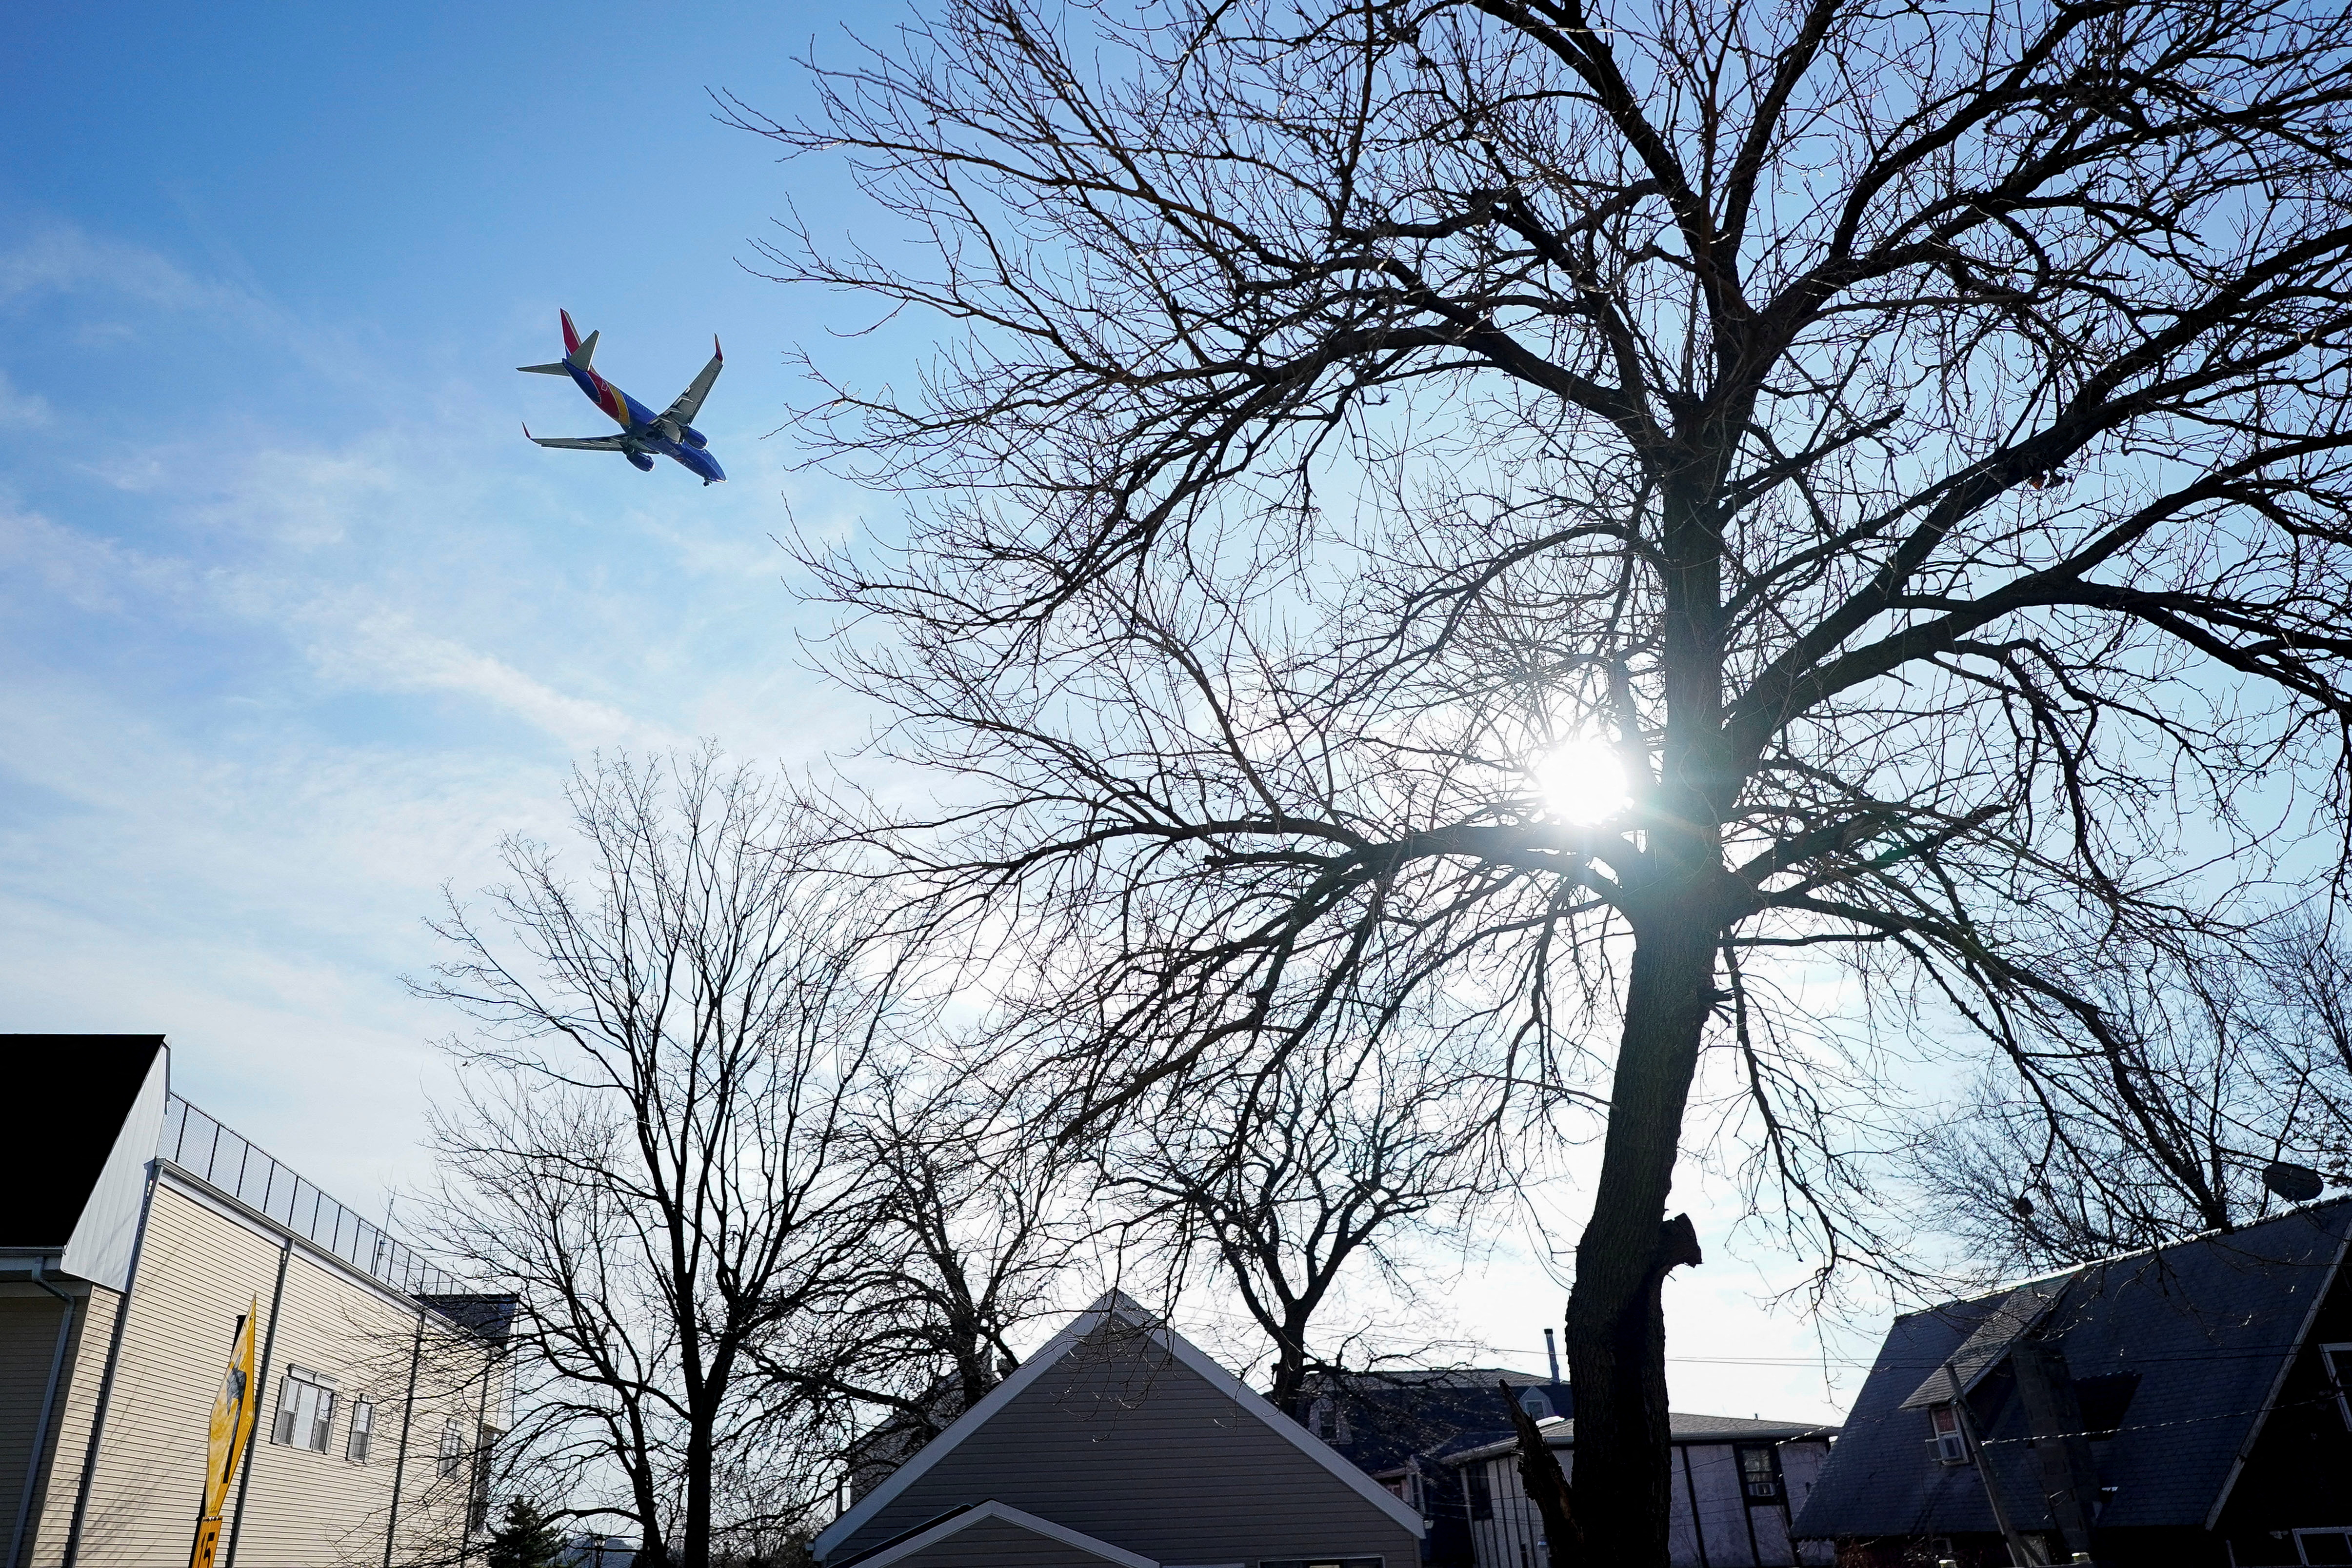 FILE PHOTO -A Southwest Airlines flight flies 500 feet above the ground while on final approach to land at LaGuardia Airport in New York City